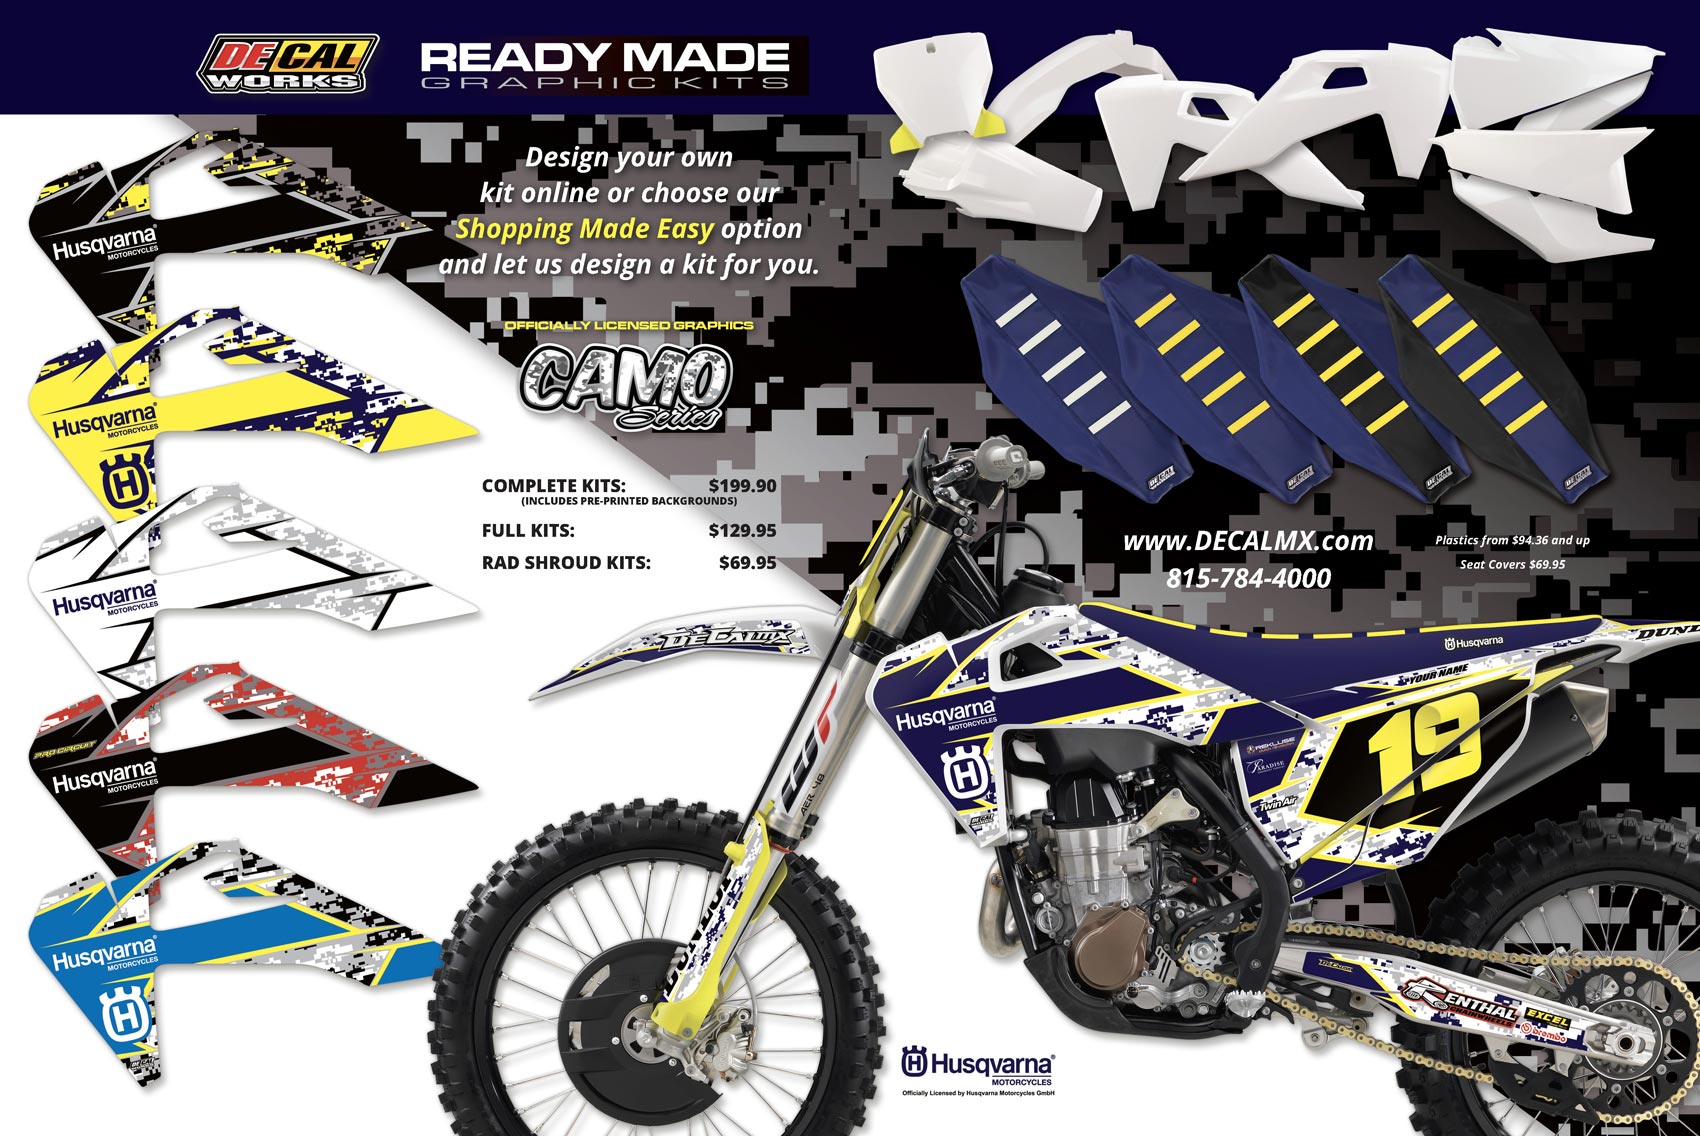 Racer X August 2019 - Decal Works Advertisement